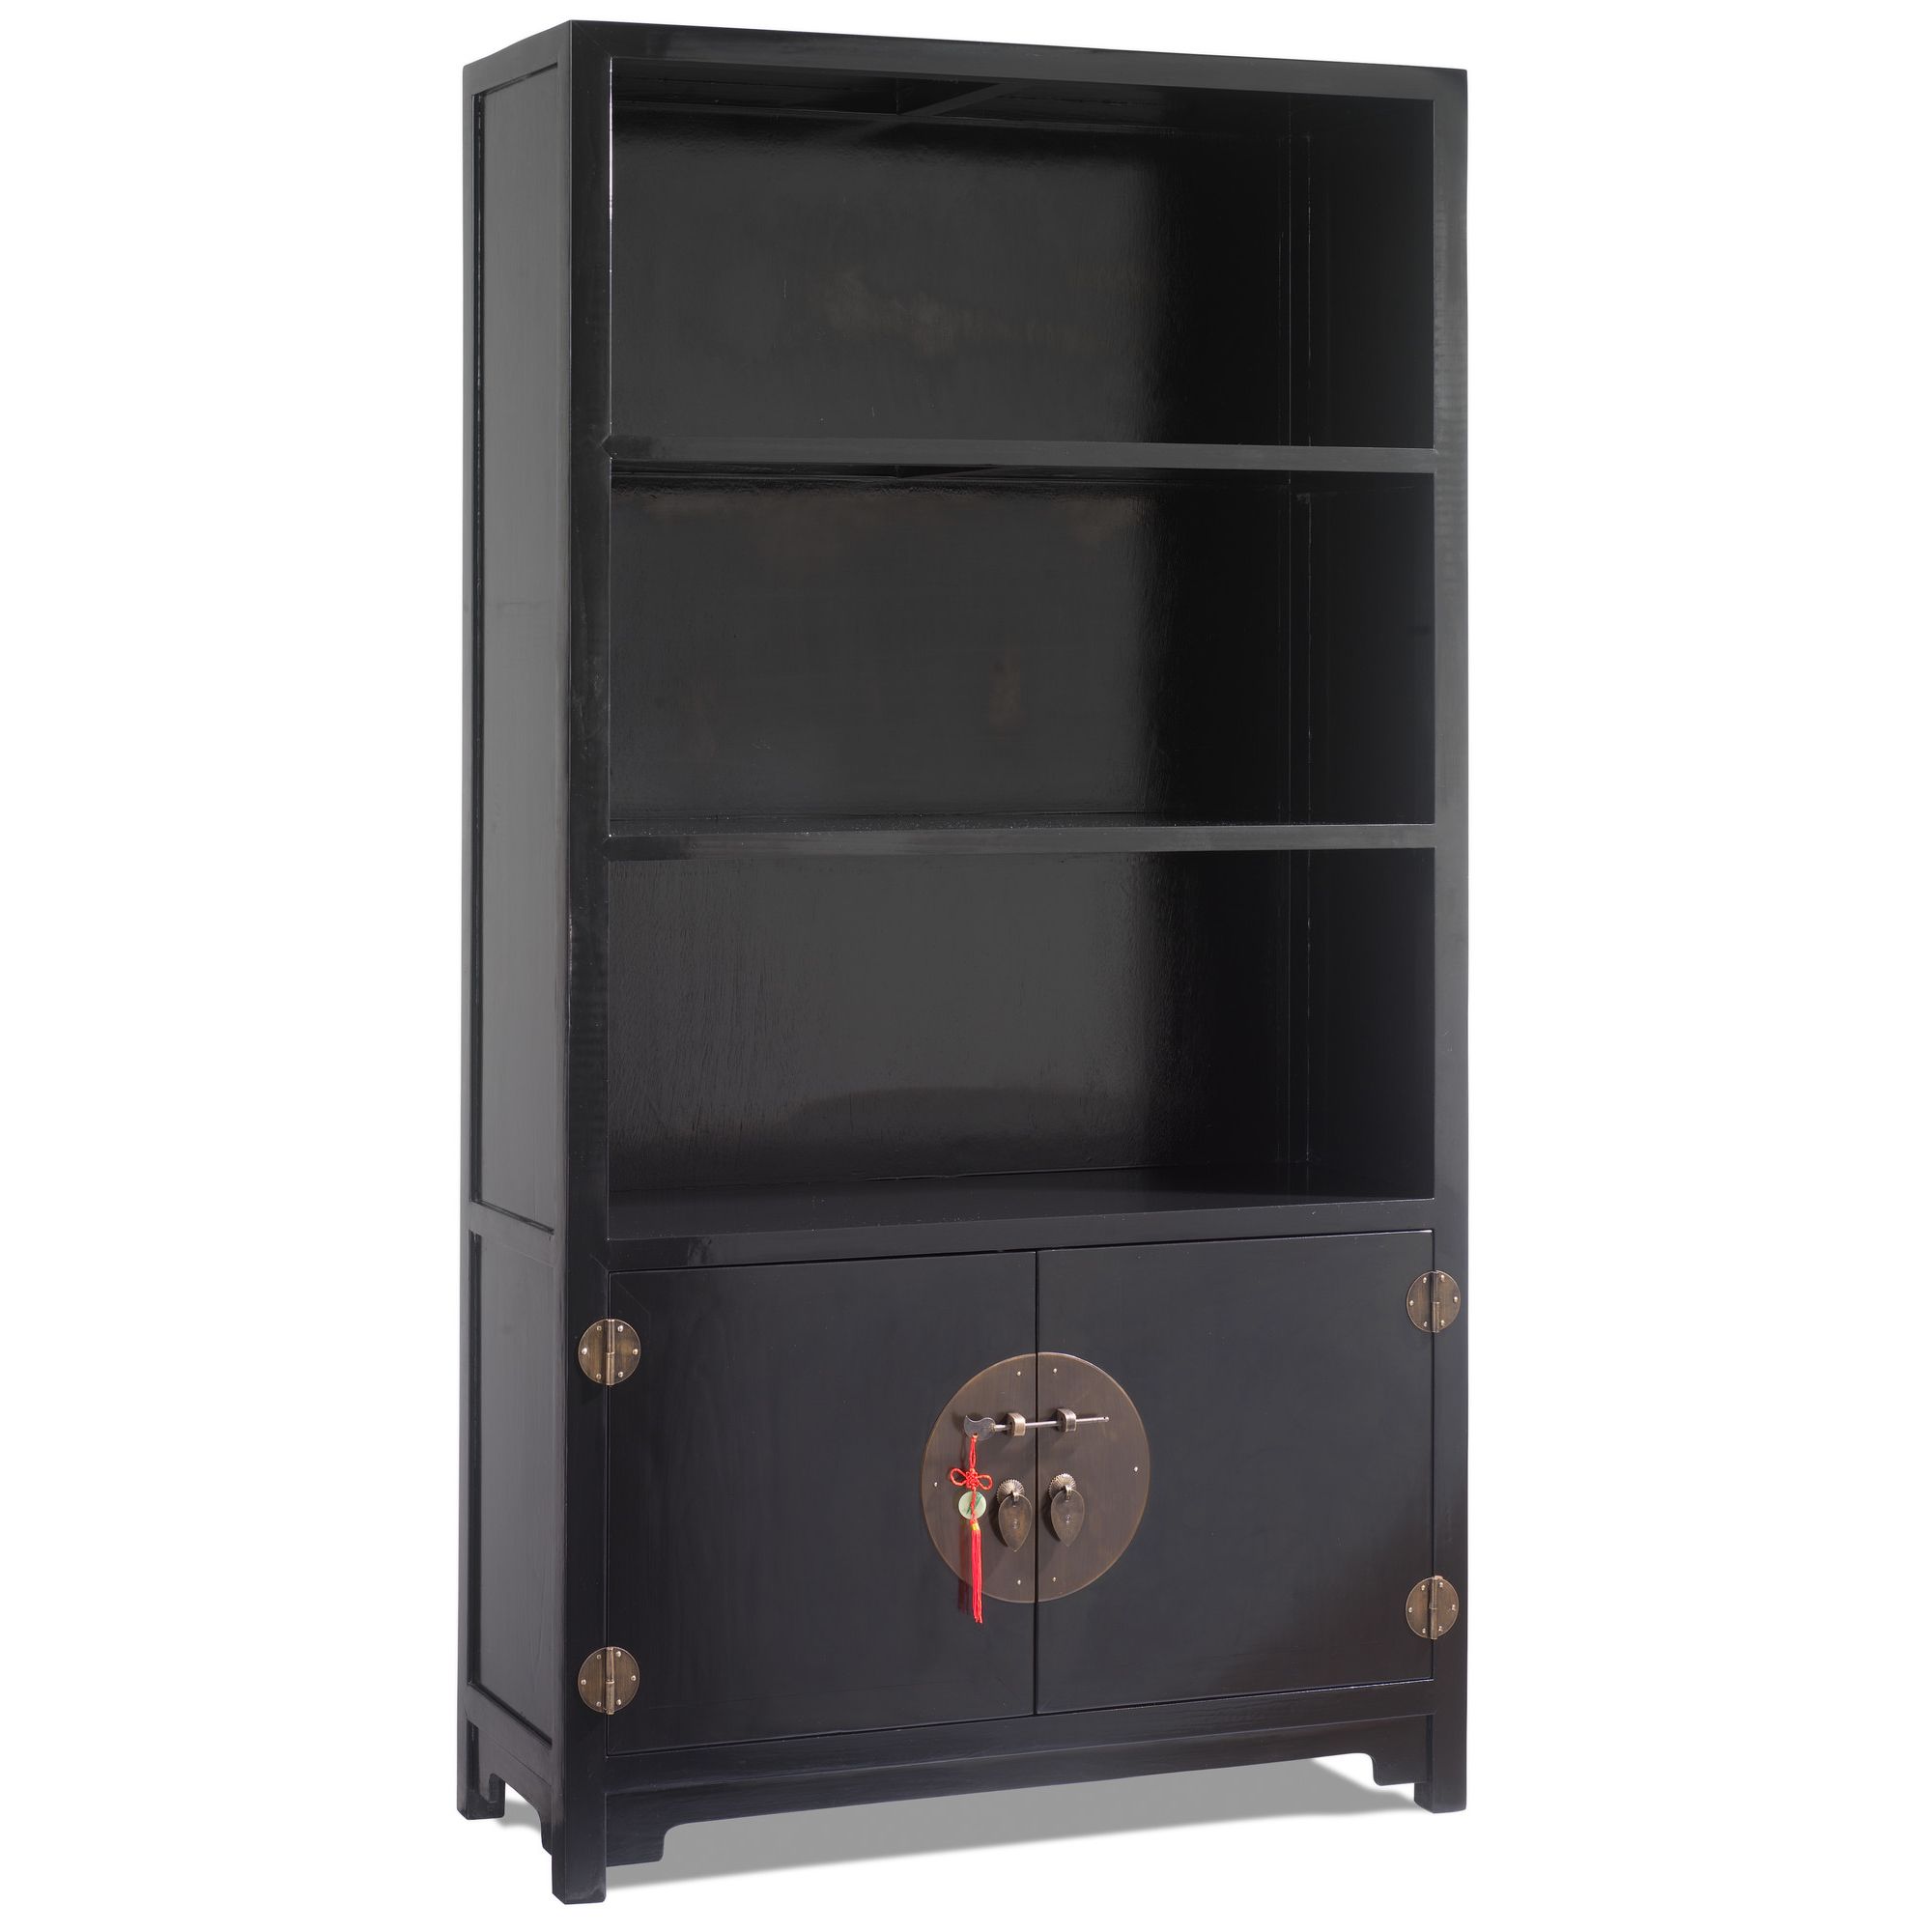 Shimu Chinese Classical Book Cabinet - Black Lacquer at Tescos Direct